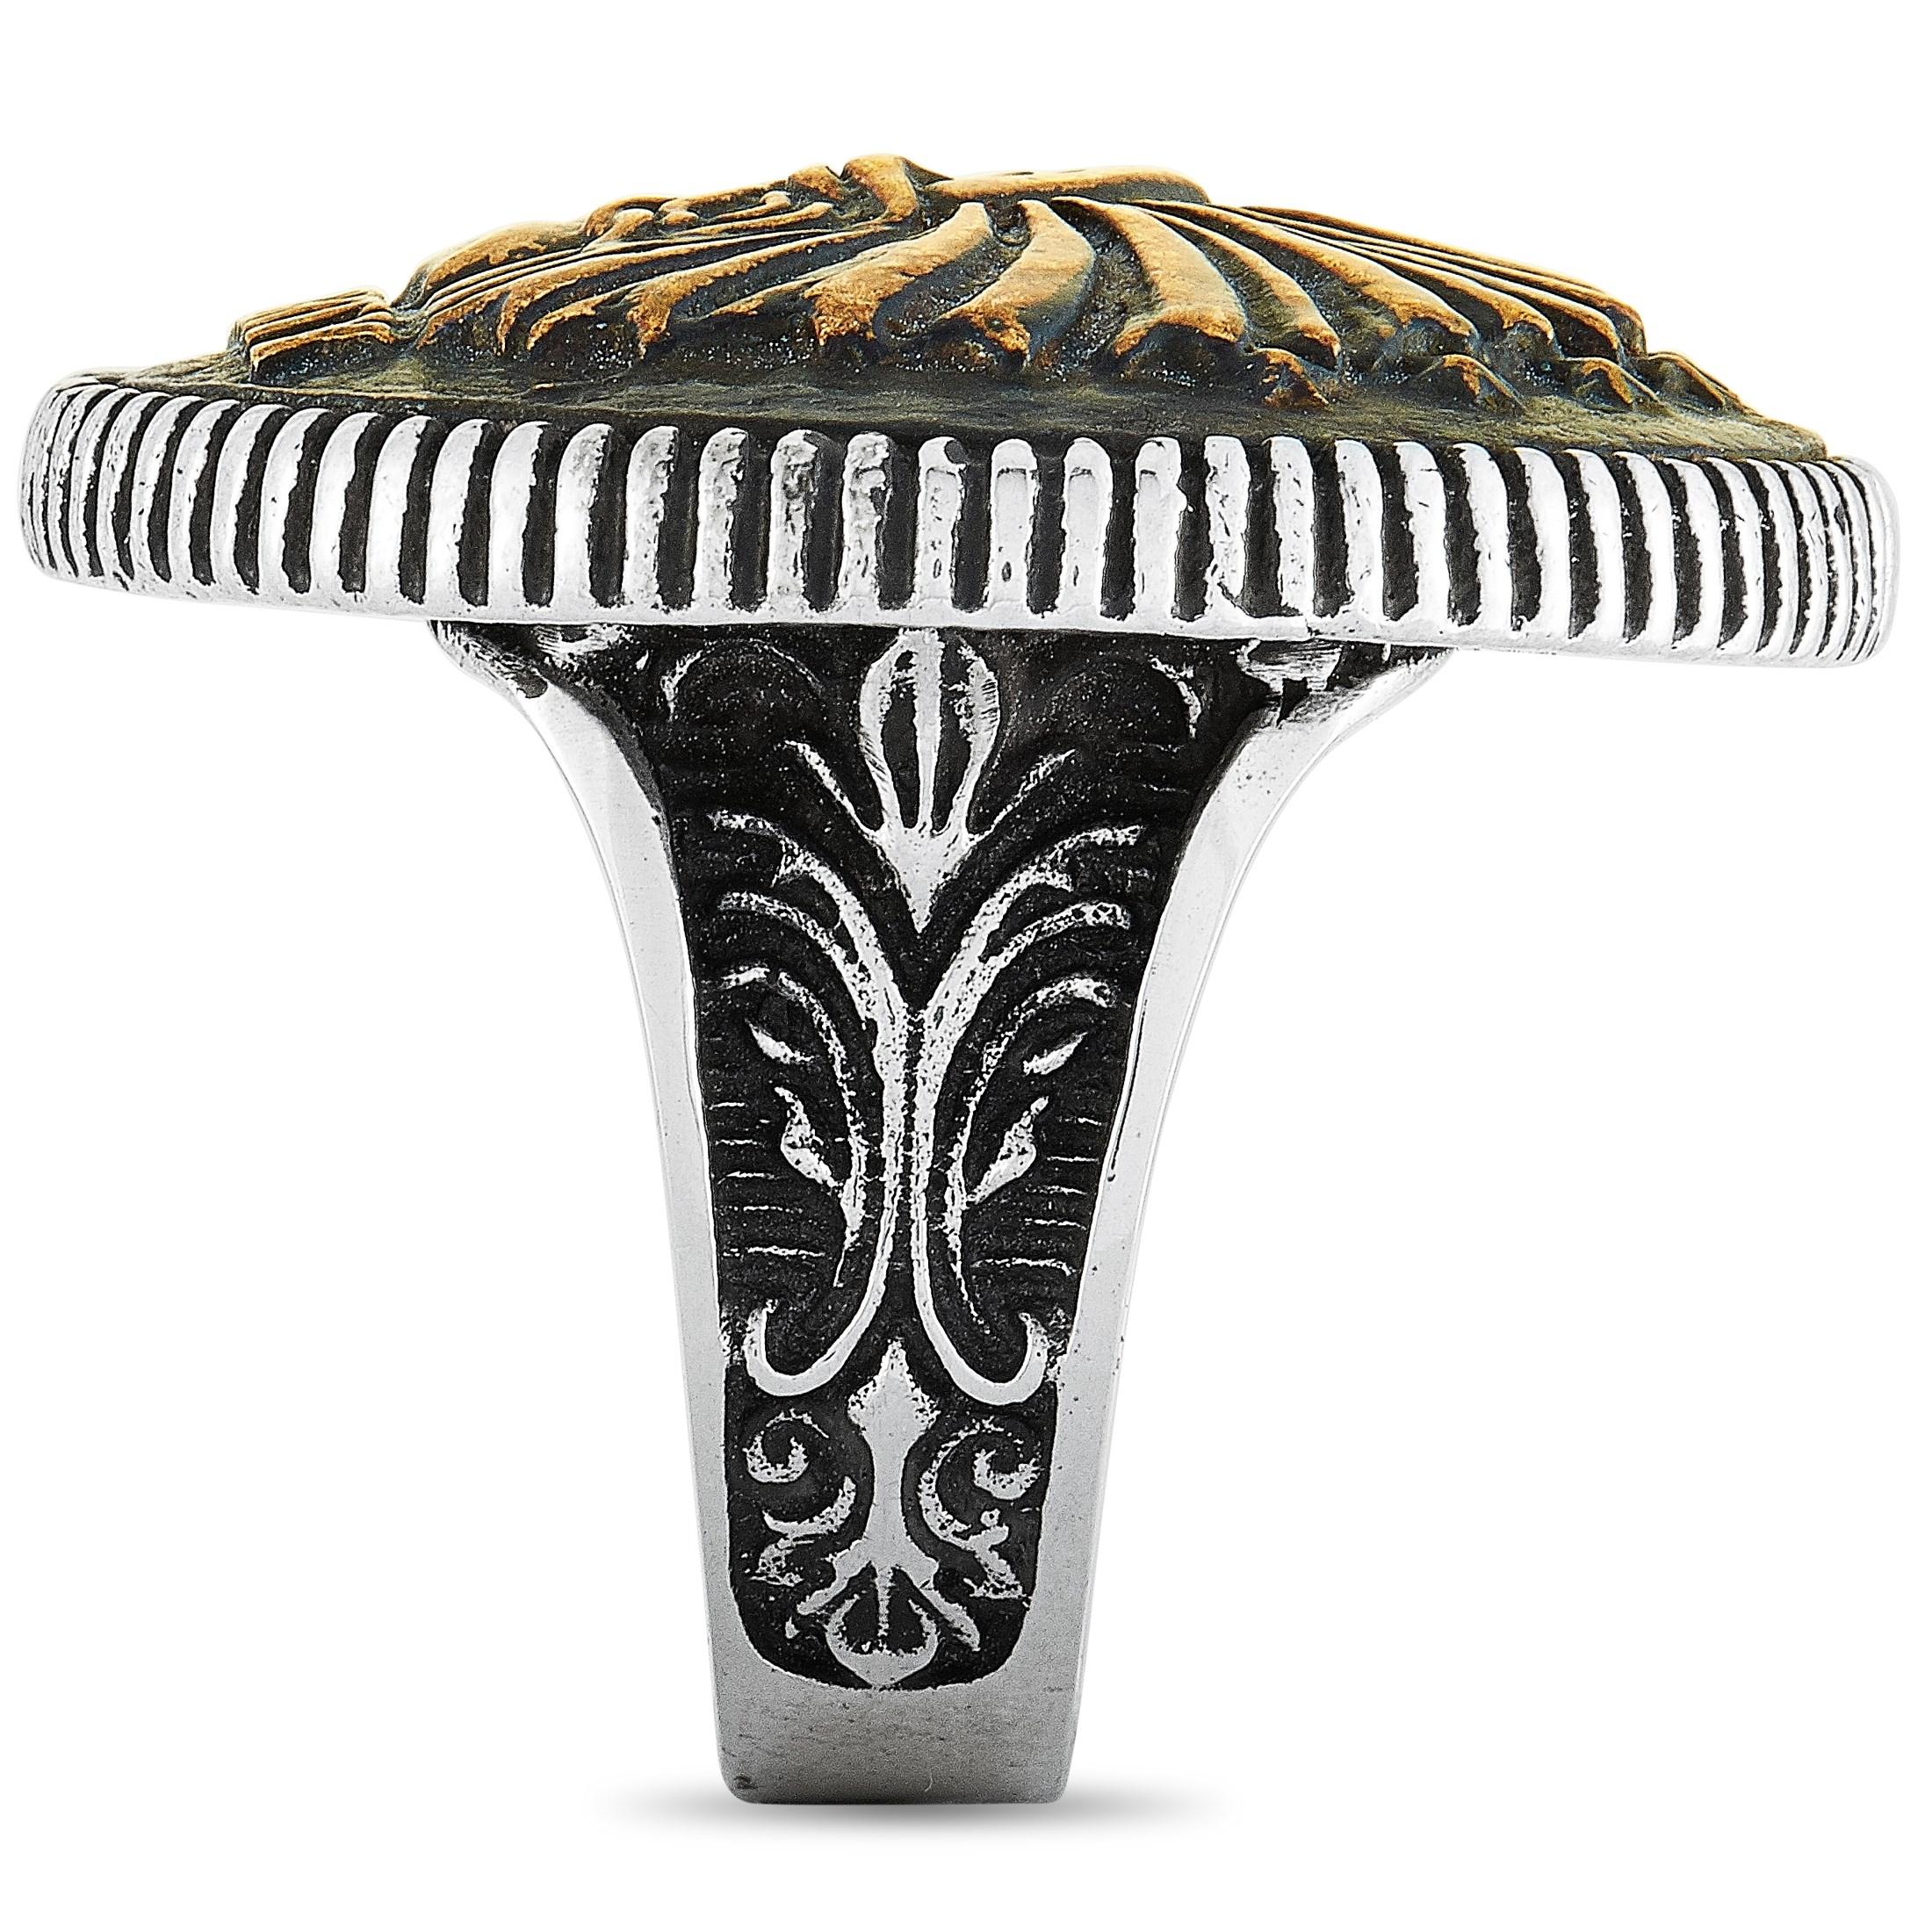 This King Baby ring is crafted from silver and weighs 54.6 grams. The ring boasts a band thickness of 6 mm and a top height of 7 mm, while the top dimensions measure 37 by 35 mm.

Offered in brand-new condition, this item includes the manufacturer’s